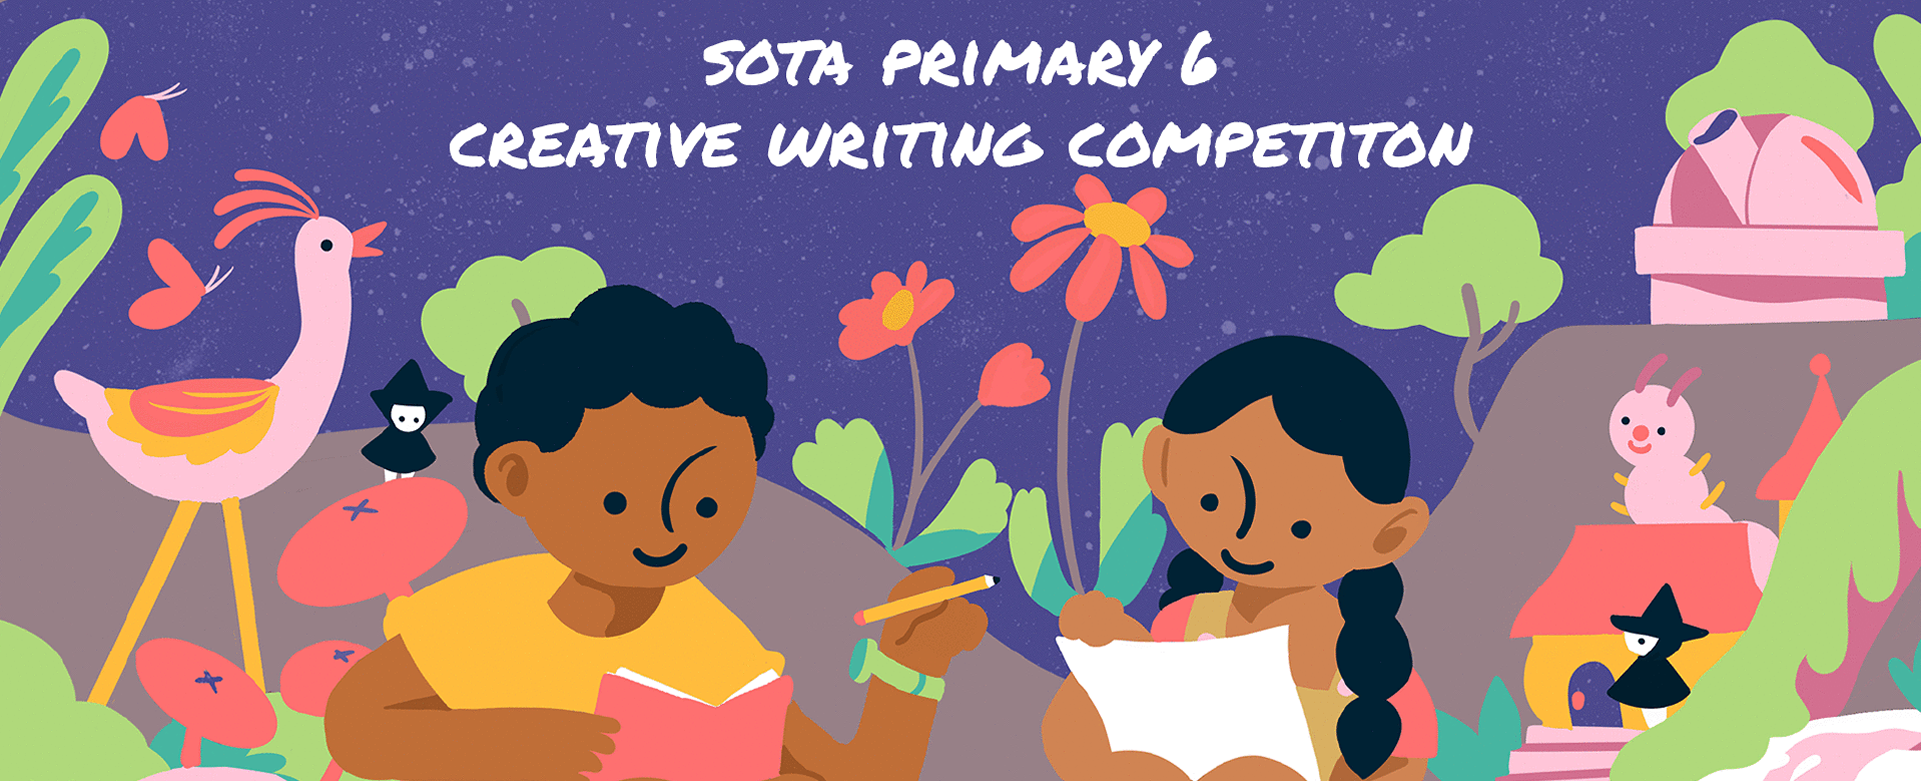 SOTA PRIMARY 6 Creative Writing Competition